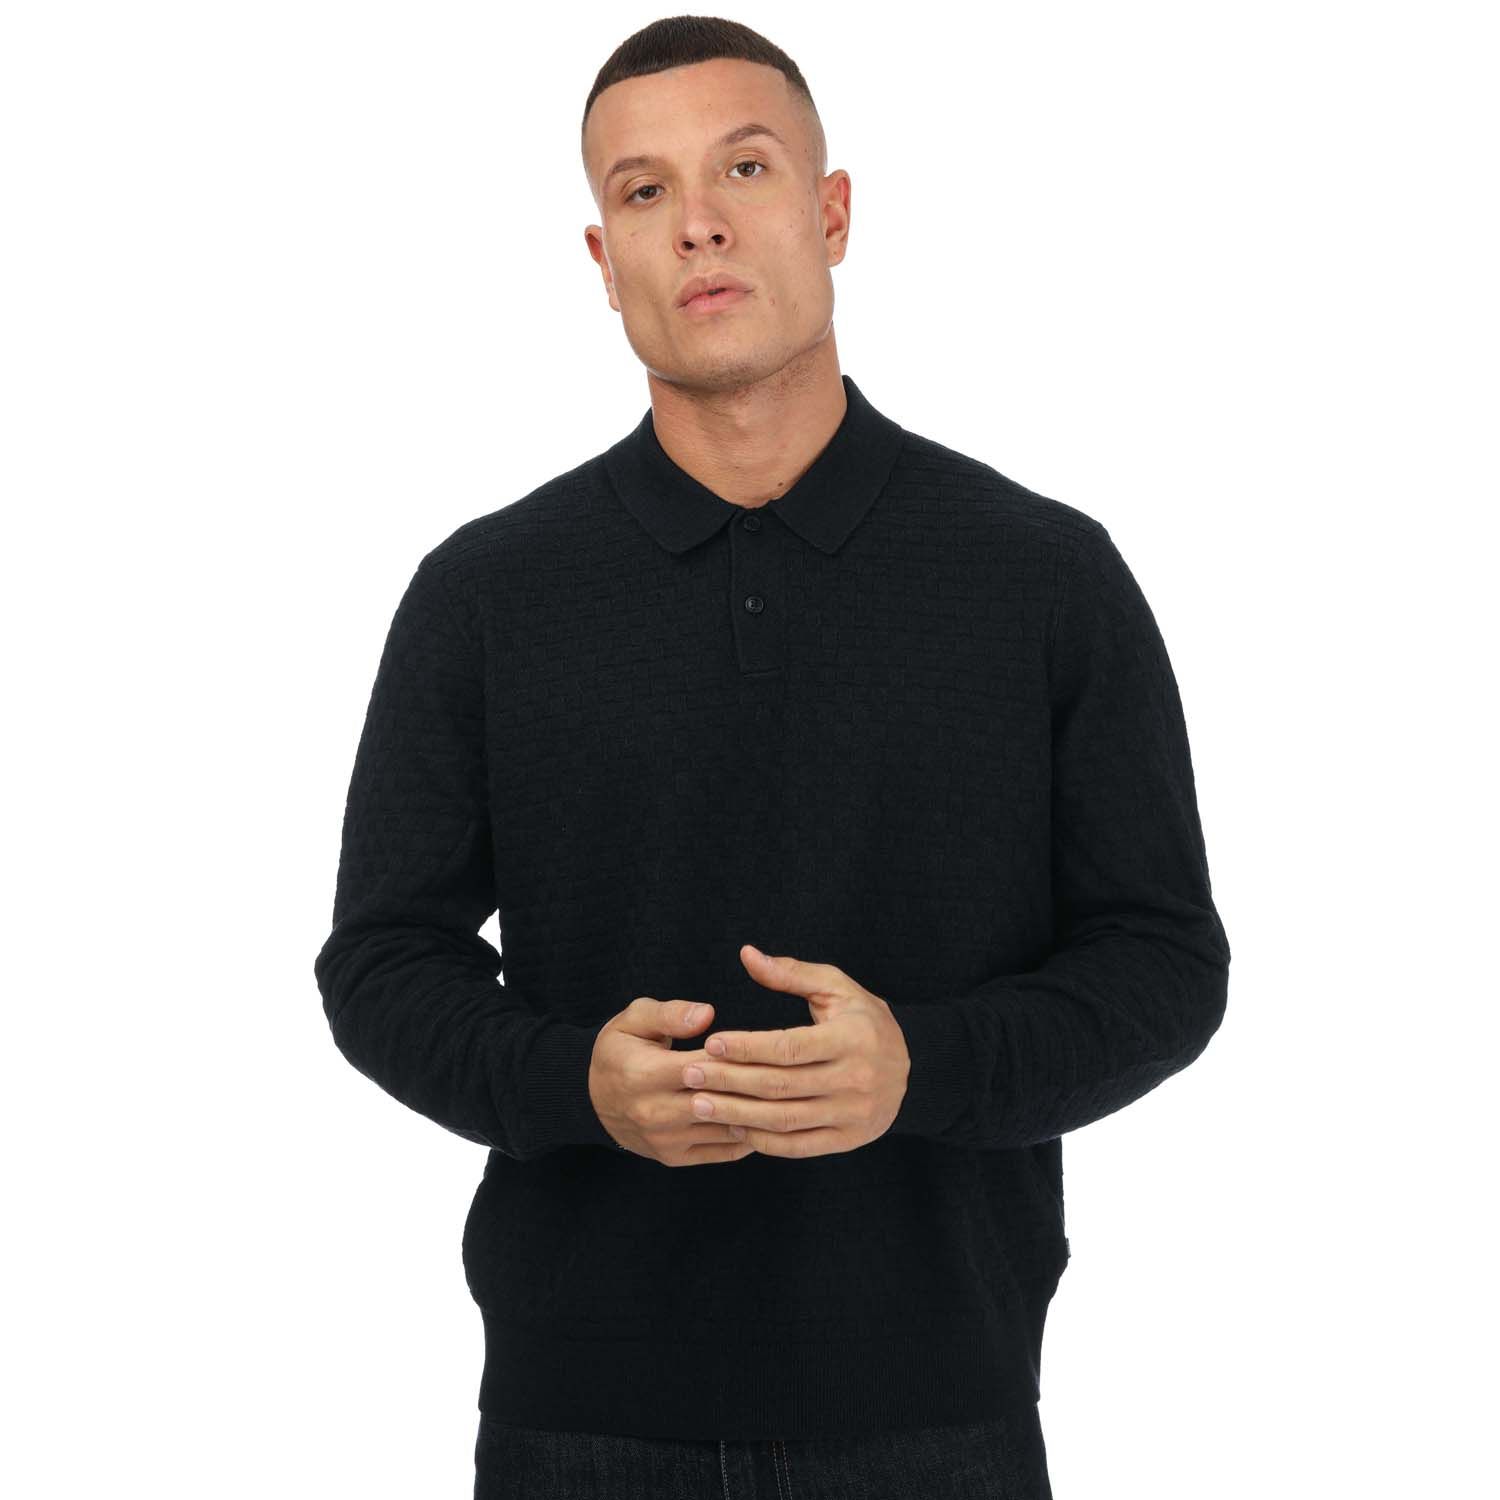 Mens Patter Long Sleeve Knitted Polo Shirt